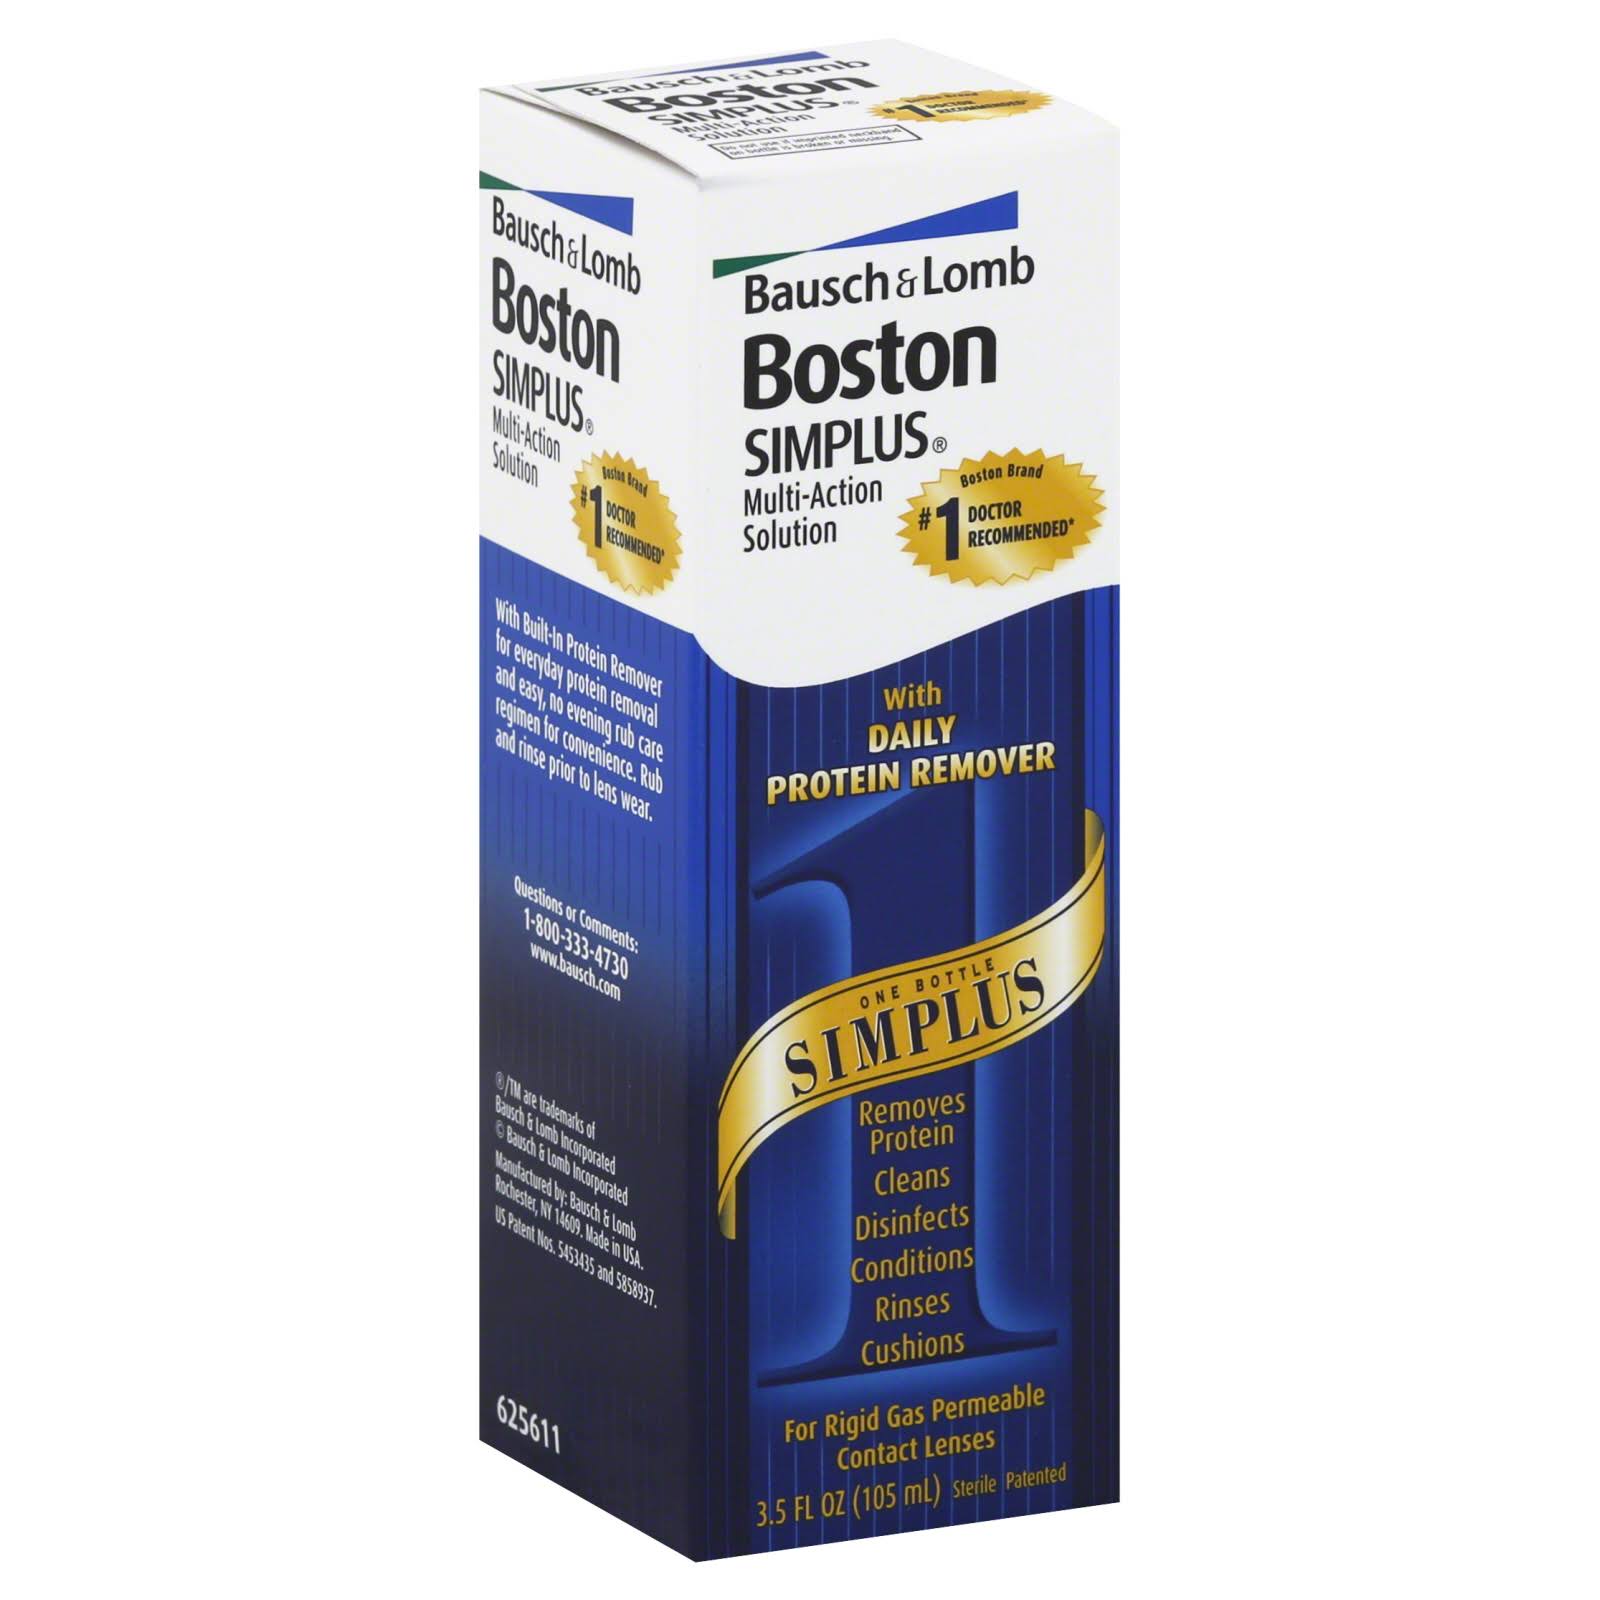 Bausch and Lomb Boston Simplus 2-in-1 Multi-Action Solution - 3.5oz